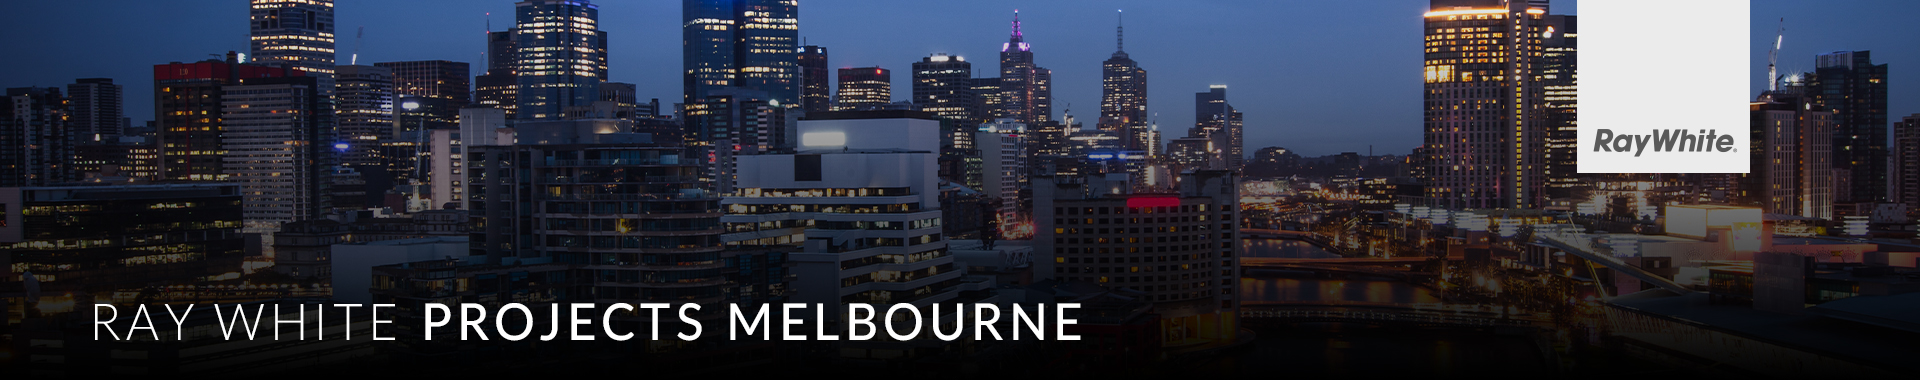 Image of Melbourne skyline at night with text in bottom left corner